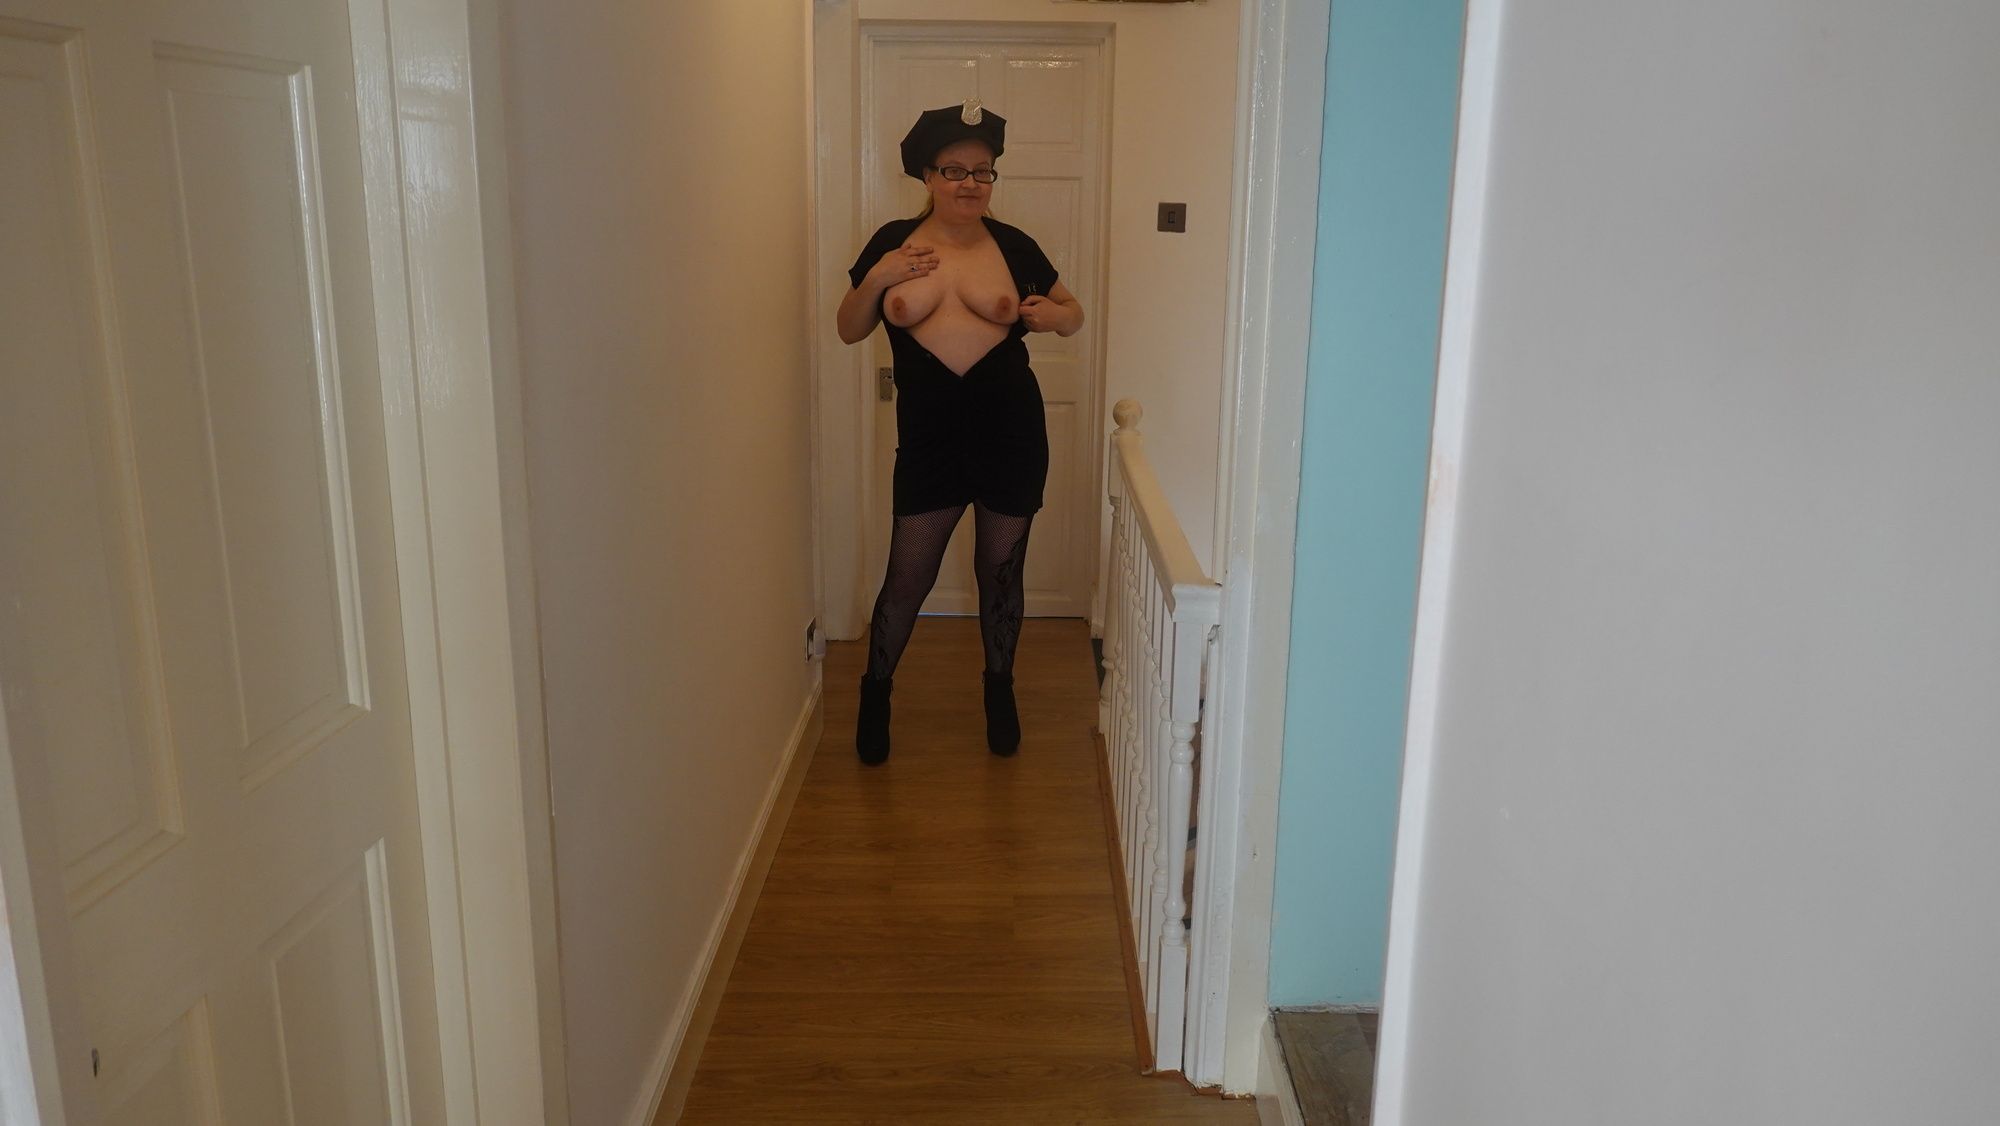 Police Woman costume and Pantyhose #4